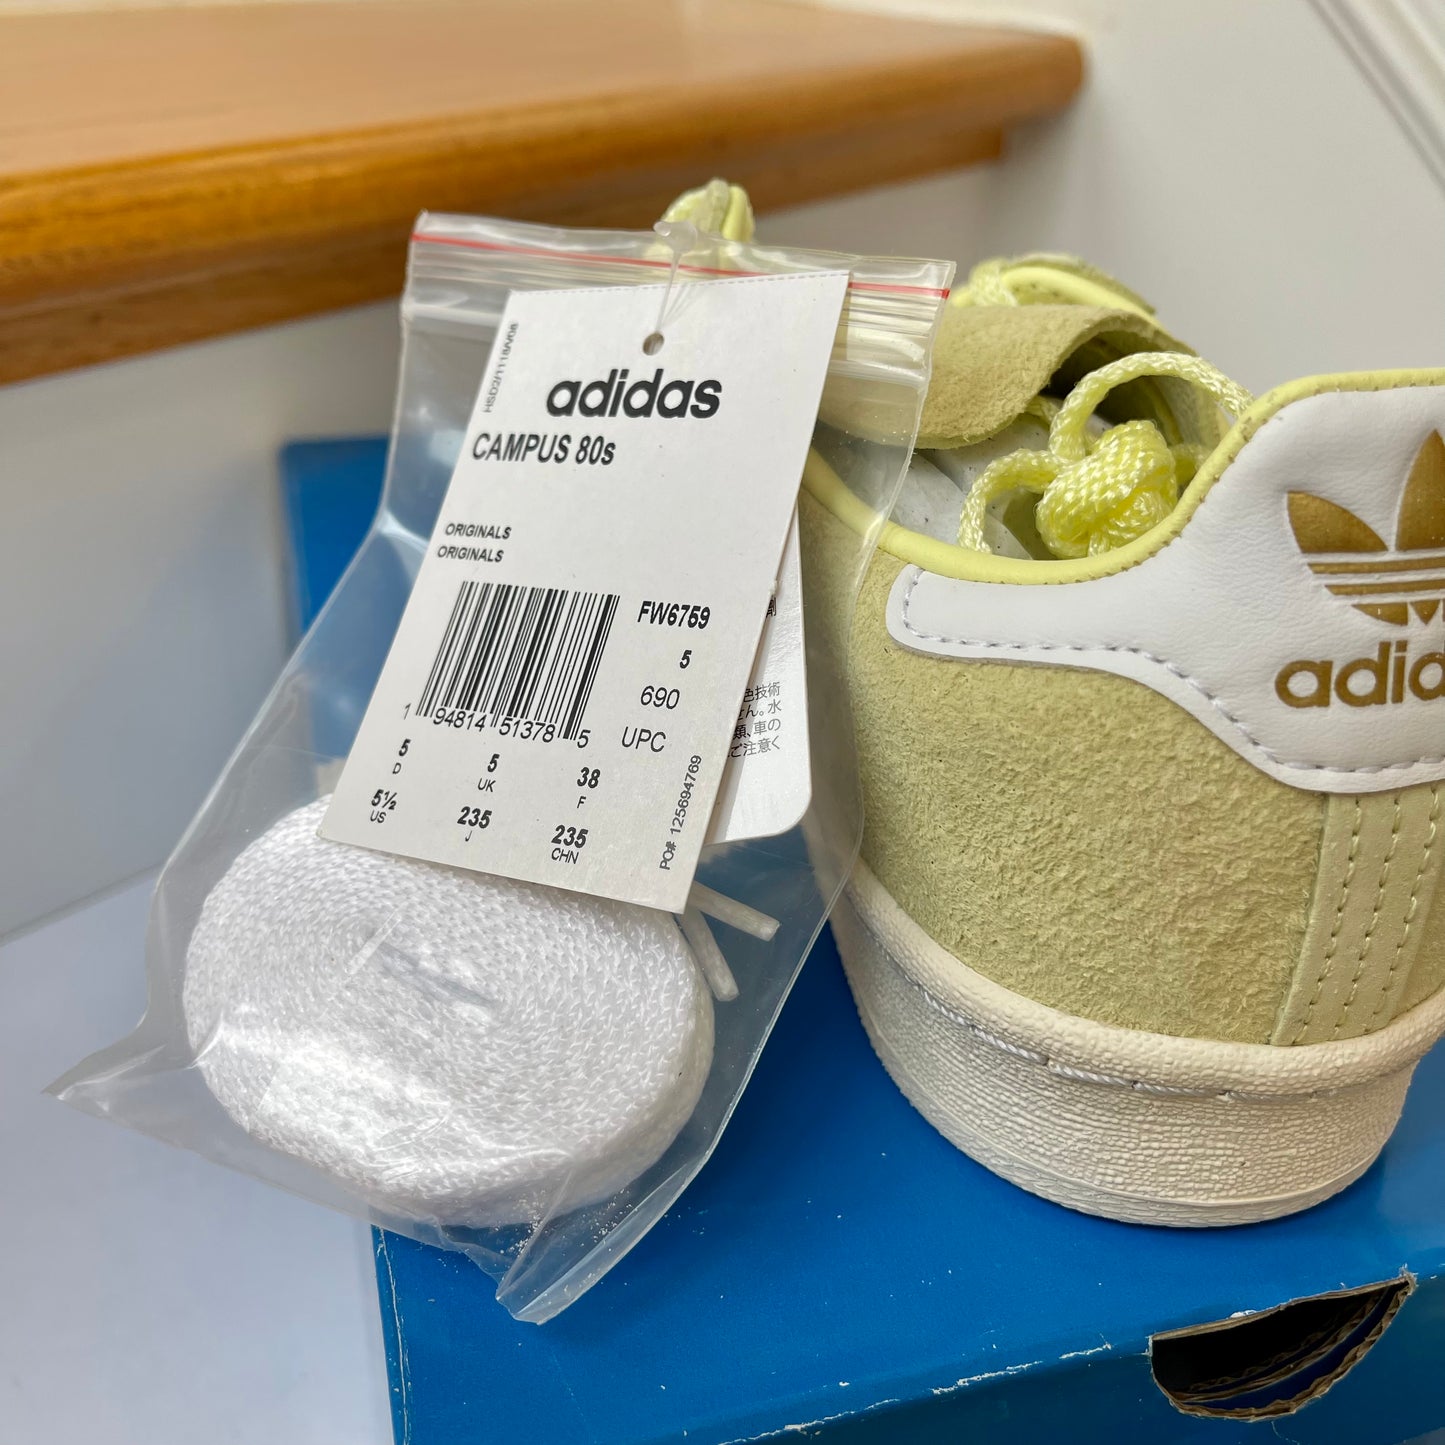 Adidas Campus 80s Light yellow green Sneakers